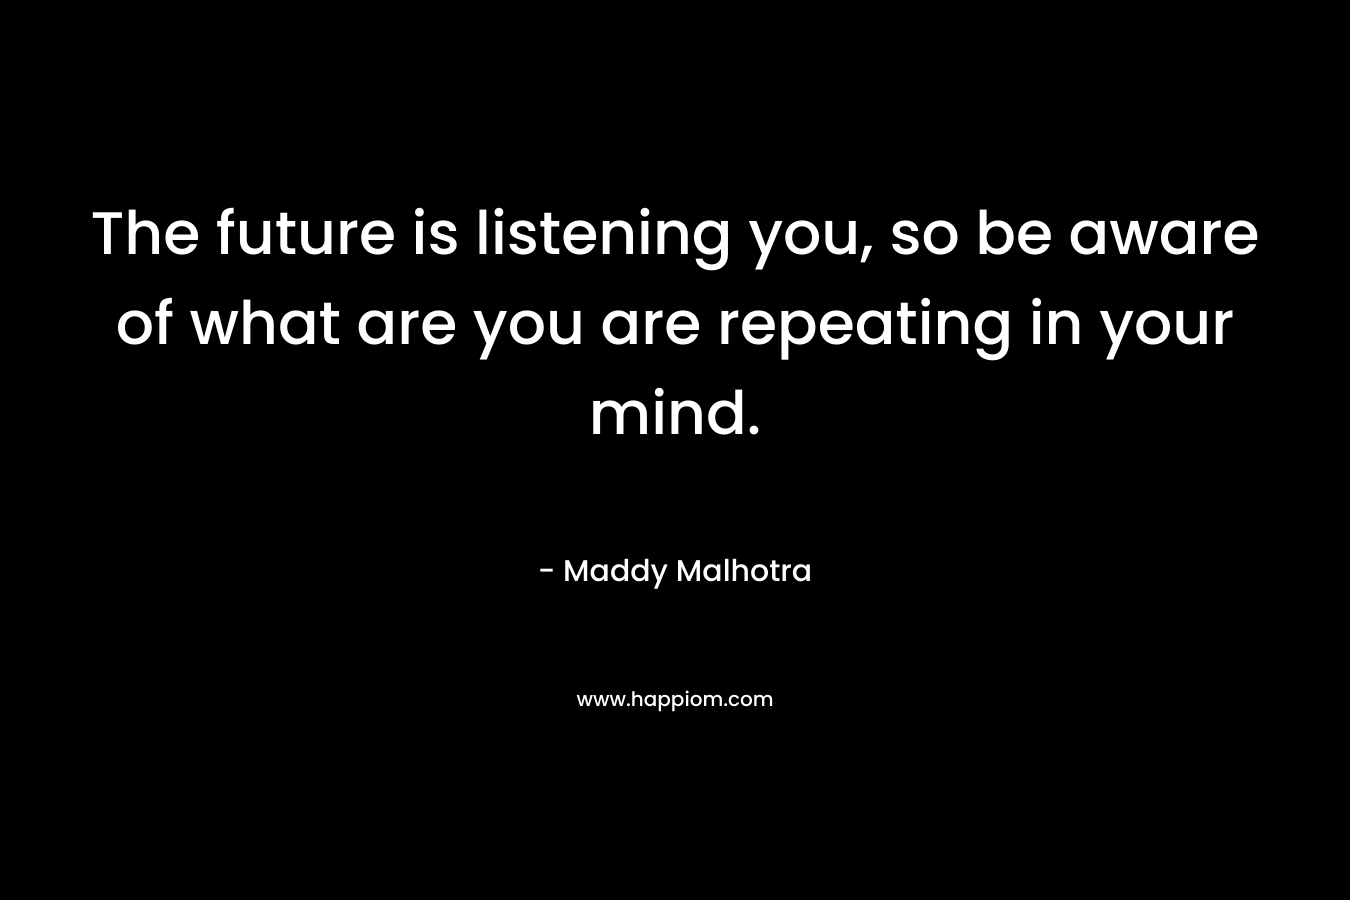 The future is listening you, so be aware of what are you are repeating in your mind. – Maddy Malhotra